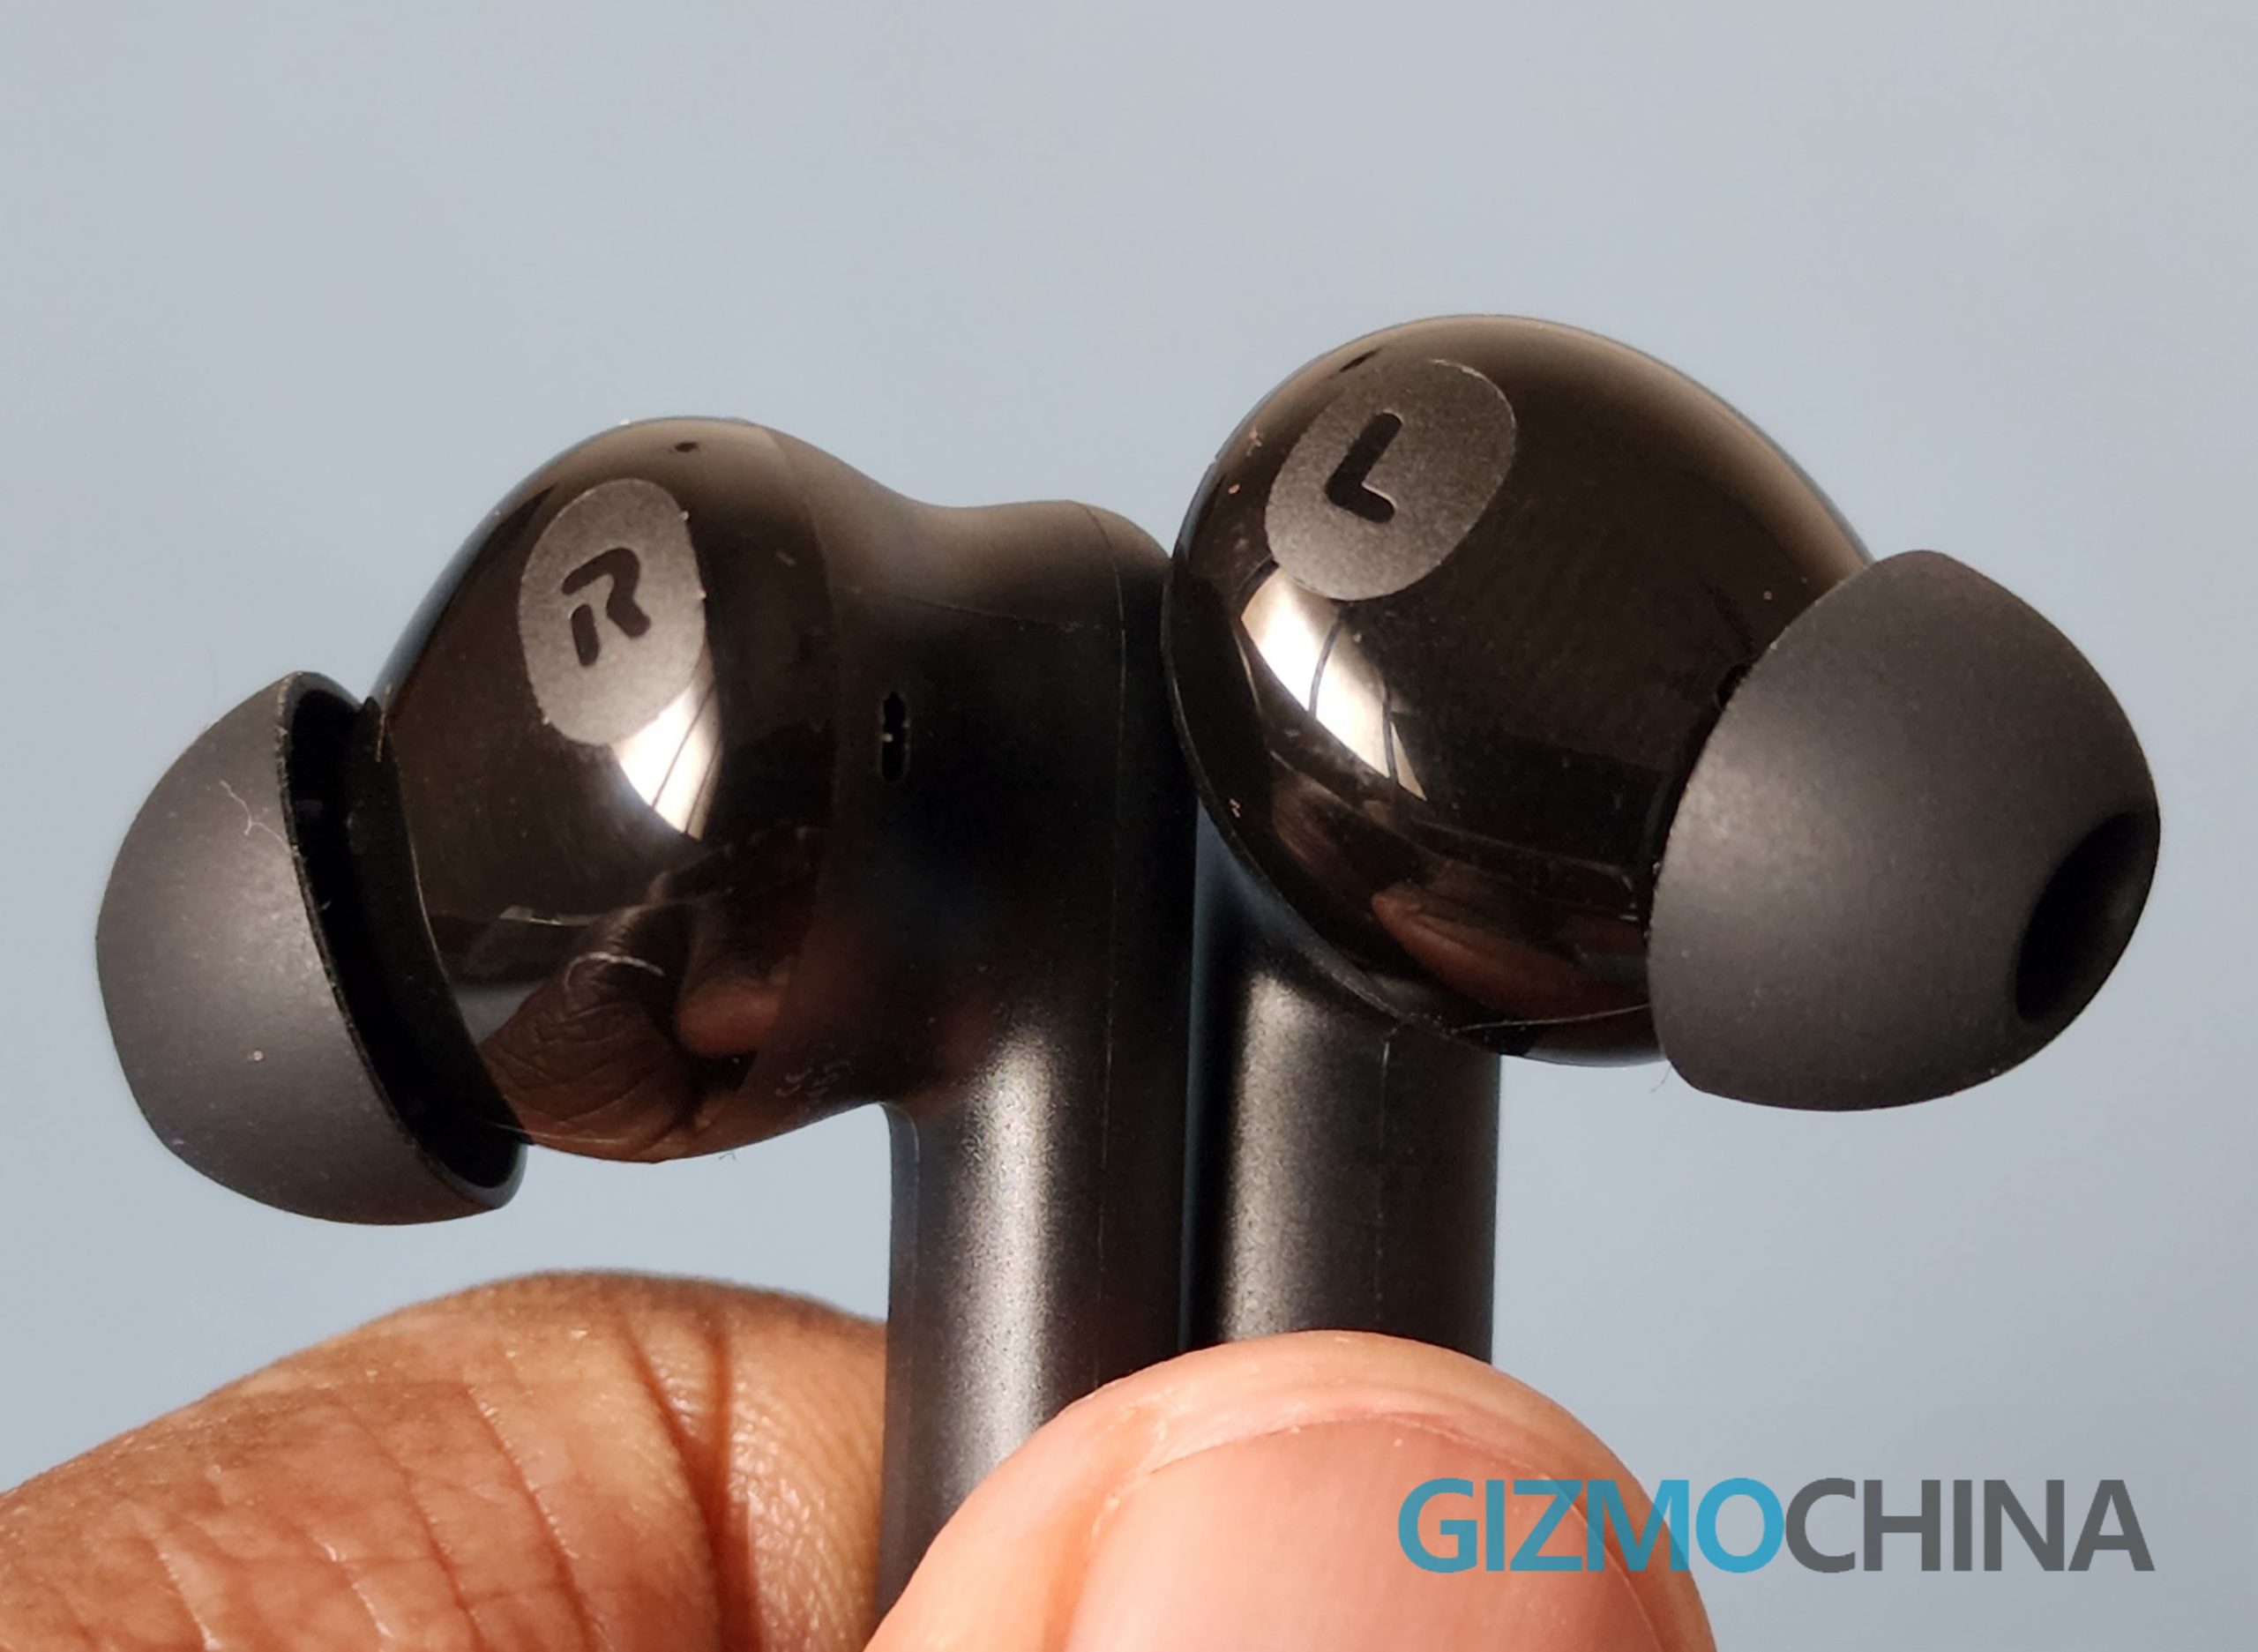 OPPO ENCO Buds 2 Review - Made With Recreation And Affordability In Mind -  1side0 - Where Binary is Tech